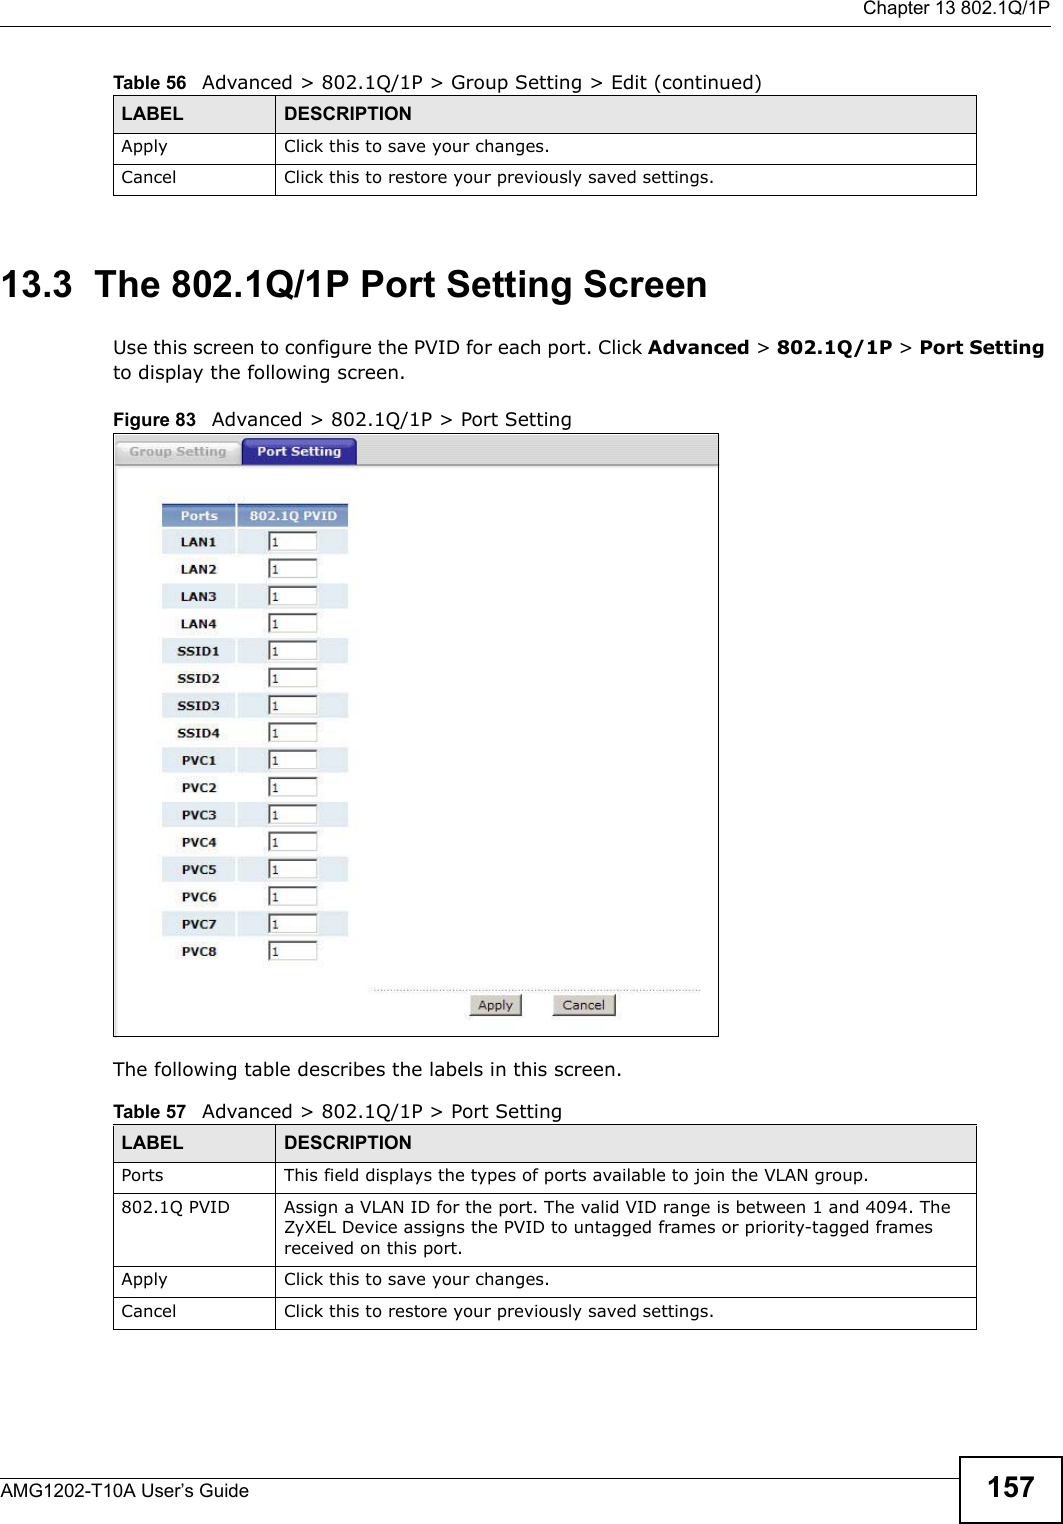  Chapter 13 802.1Q/1PAMG1202-T10A User’s Guide 15713.3  The 802.1Q/1P Port Setting ScreenUse this screen to configure the PVID for each port. Click Advanced &gt; 802.1Q/1P &gt; Port Setting to display the following screen.Figure 83   Advanced &gt; 802.1Q/1P &gt; Port SettingThe following table describes the labels in this screen.  Apply Click this to save your changes.Cancel Click this to restore your previously saved settings.Table 56   Advanced &gt; 802.1Q/1P &gt; Group Setting &gt; Edit (continued)LABEL DESCRIPTIONTable 57   Advanced &gt; 802.1Q/1P &gt; Port SettingLABEL DESCRIPTIONPorts This field displays the types of ports available to join the VLAN group.802.1Q PVID Assign a VLAN ID for the port. The valid VID range is between 1 and 4094. The ZyXEL Device assigns the PVID to untagged frames or priority-tagged frames received on this port.Apply Click this to save your changes.Cancel Click this to restore your previously saved settings.